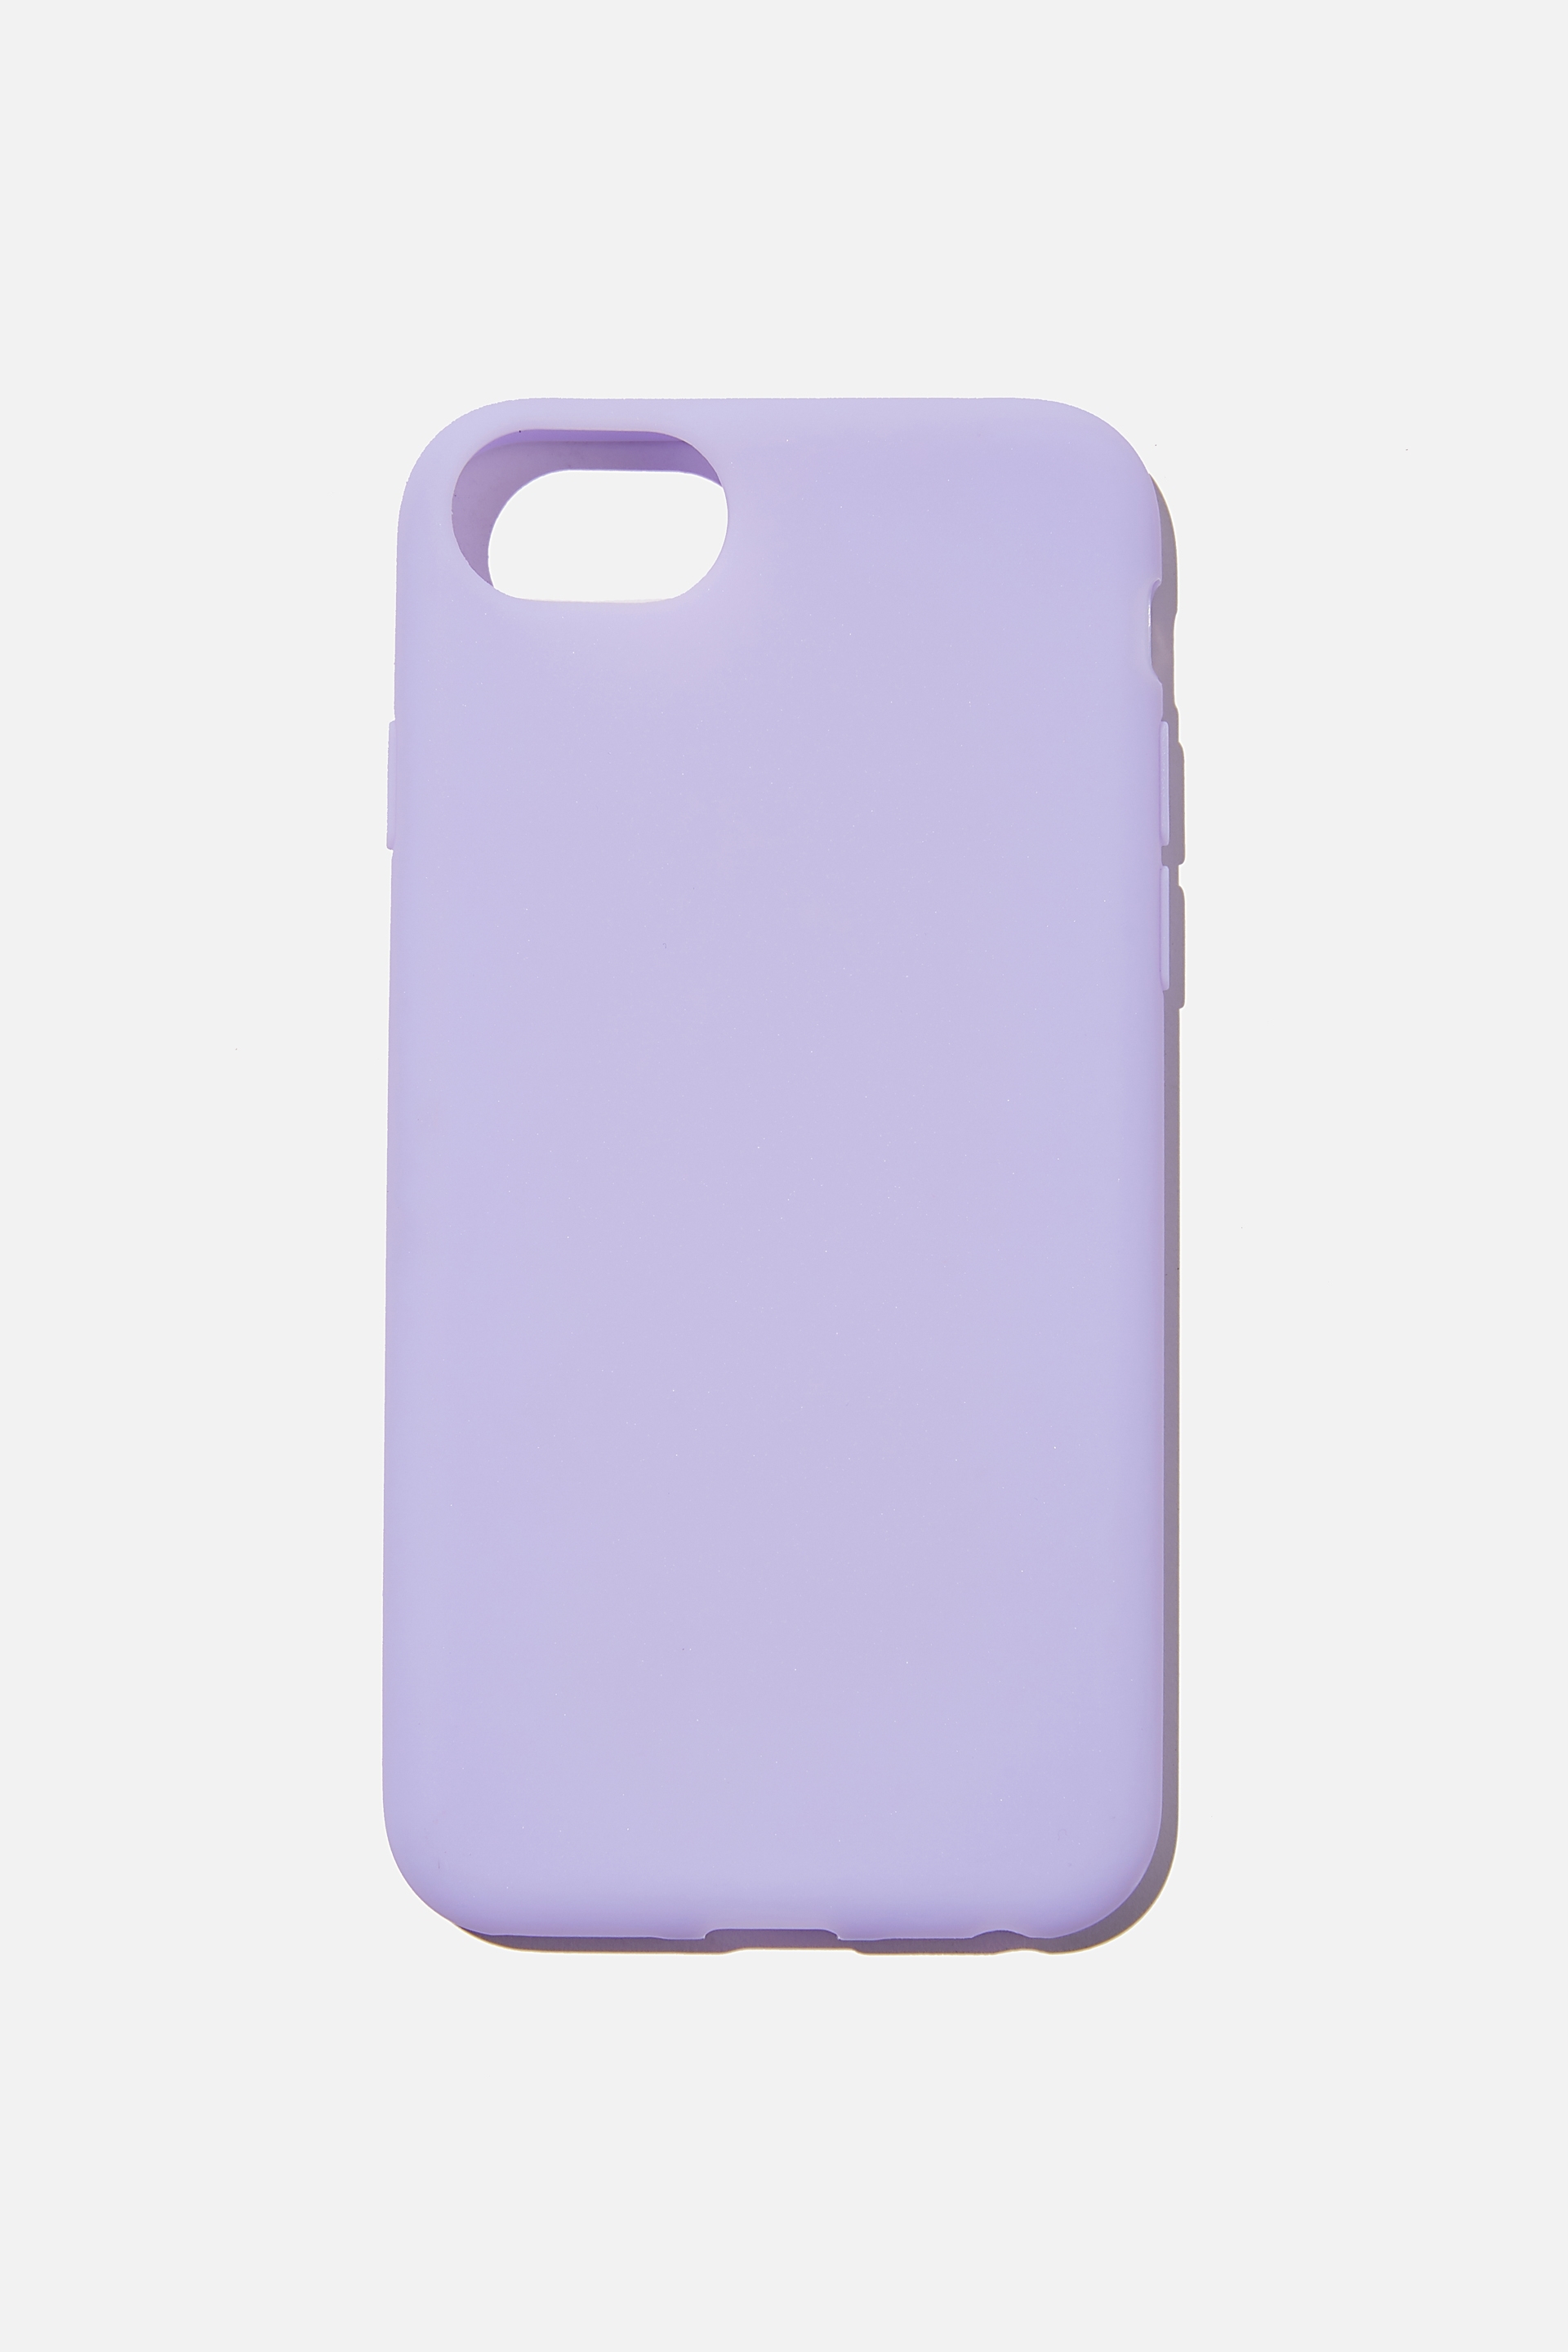 Typo - Recycled Phone Case iPhone 6, 7, 8, SE - Pale lilac